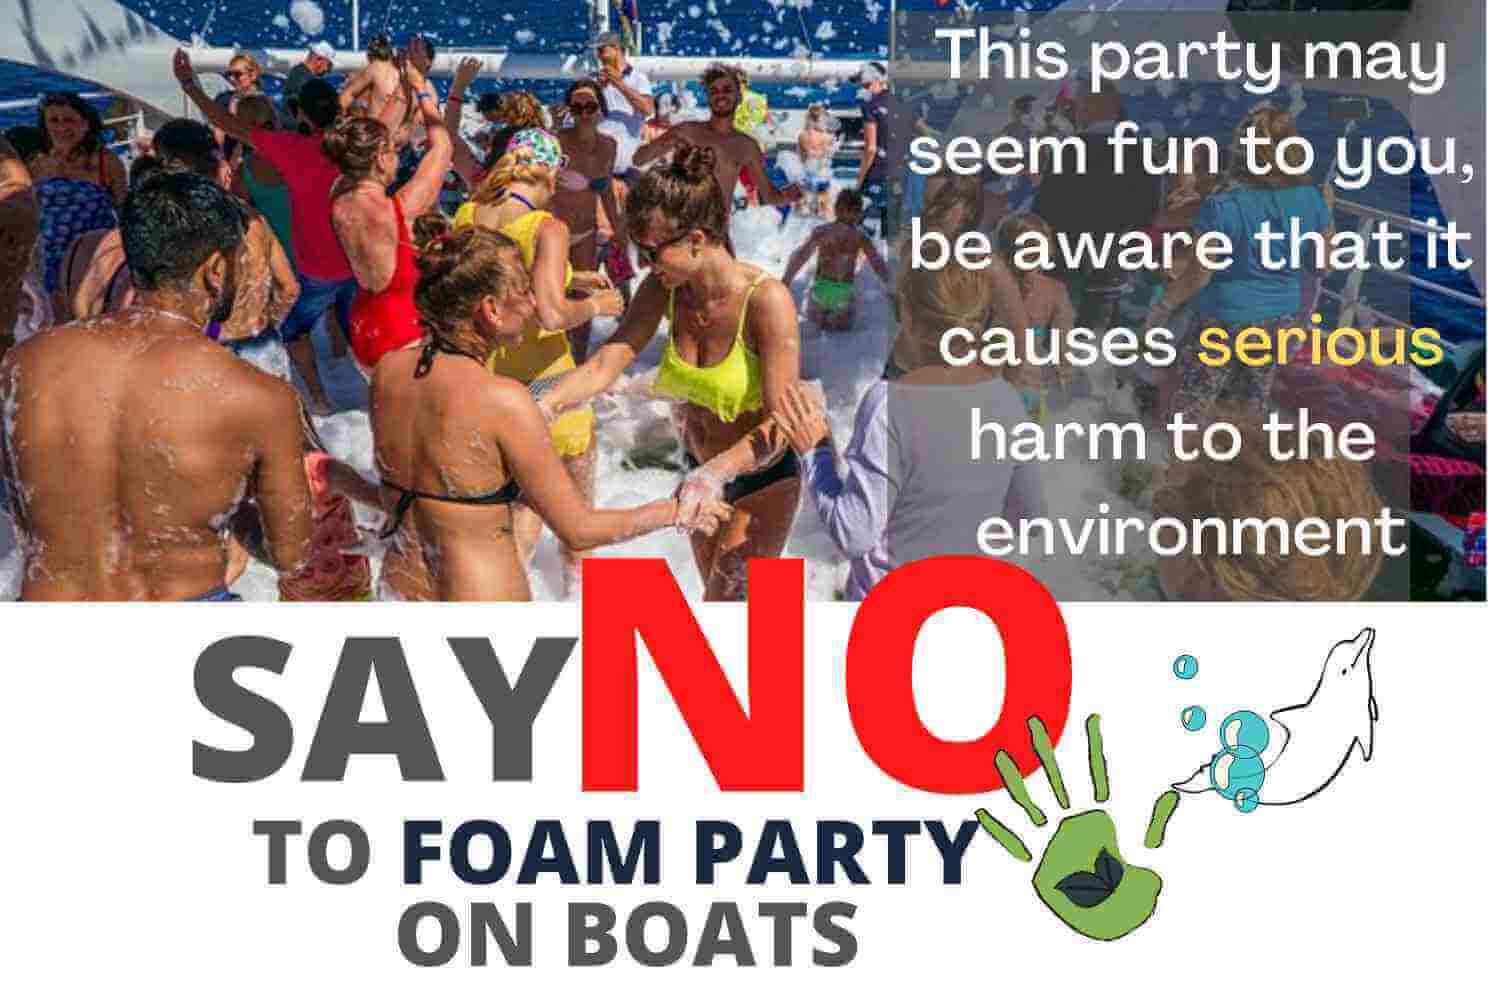 Marmaris Boat Foam Parties are bad for the environment, please avoid such companies . please be responsible when making choices.